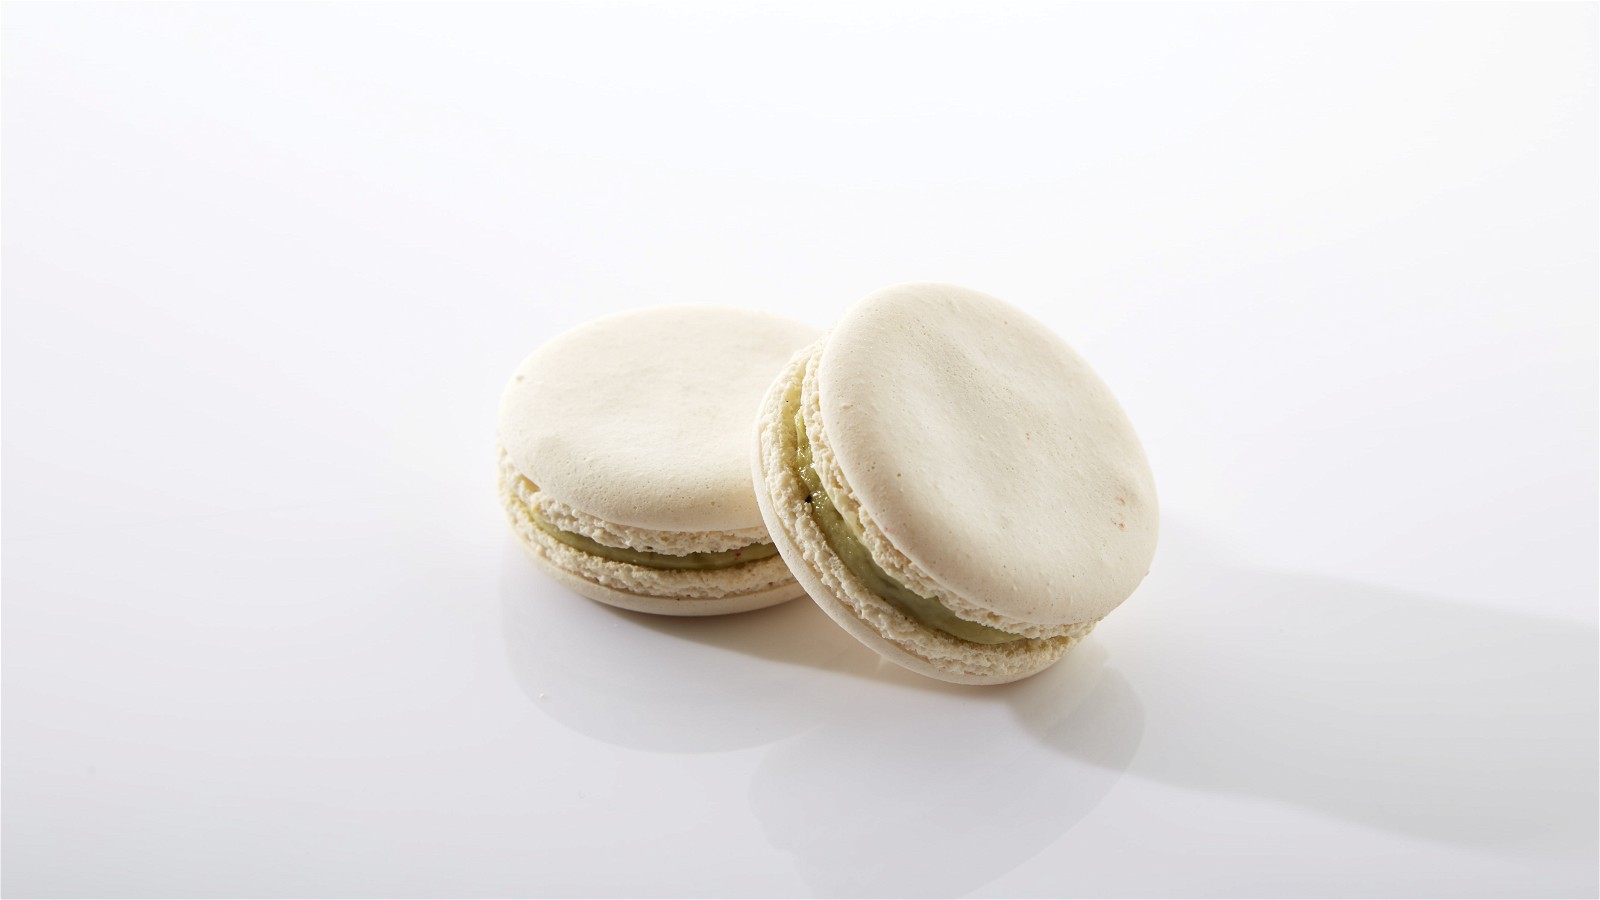 Image of Delicious French Macarons with Vanilla Buttercream Filling